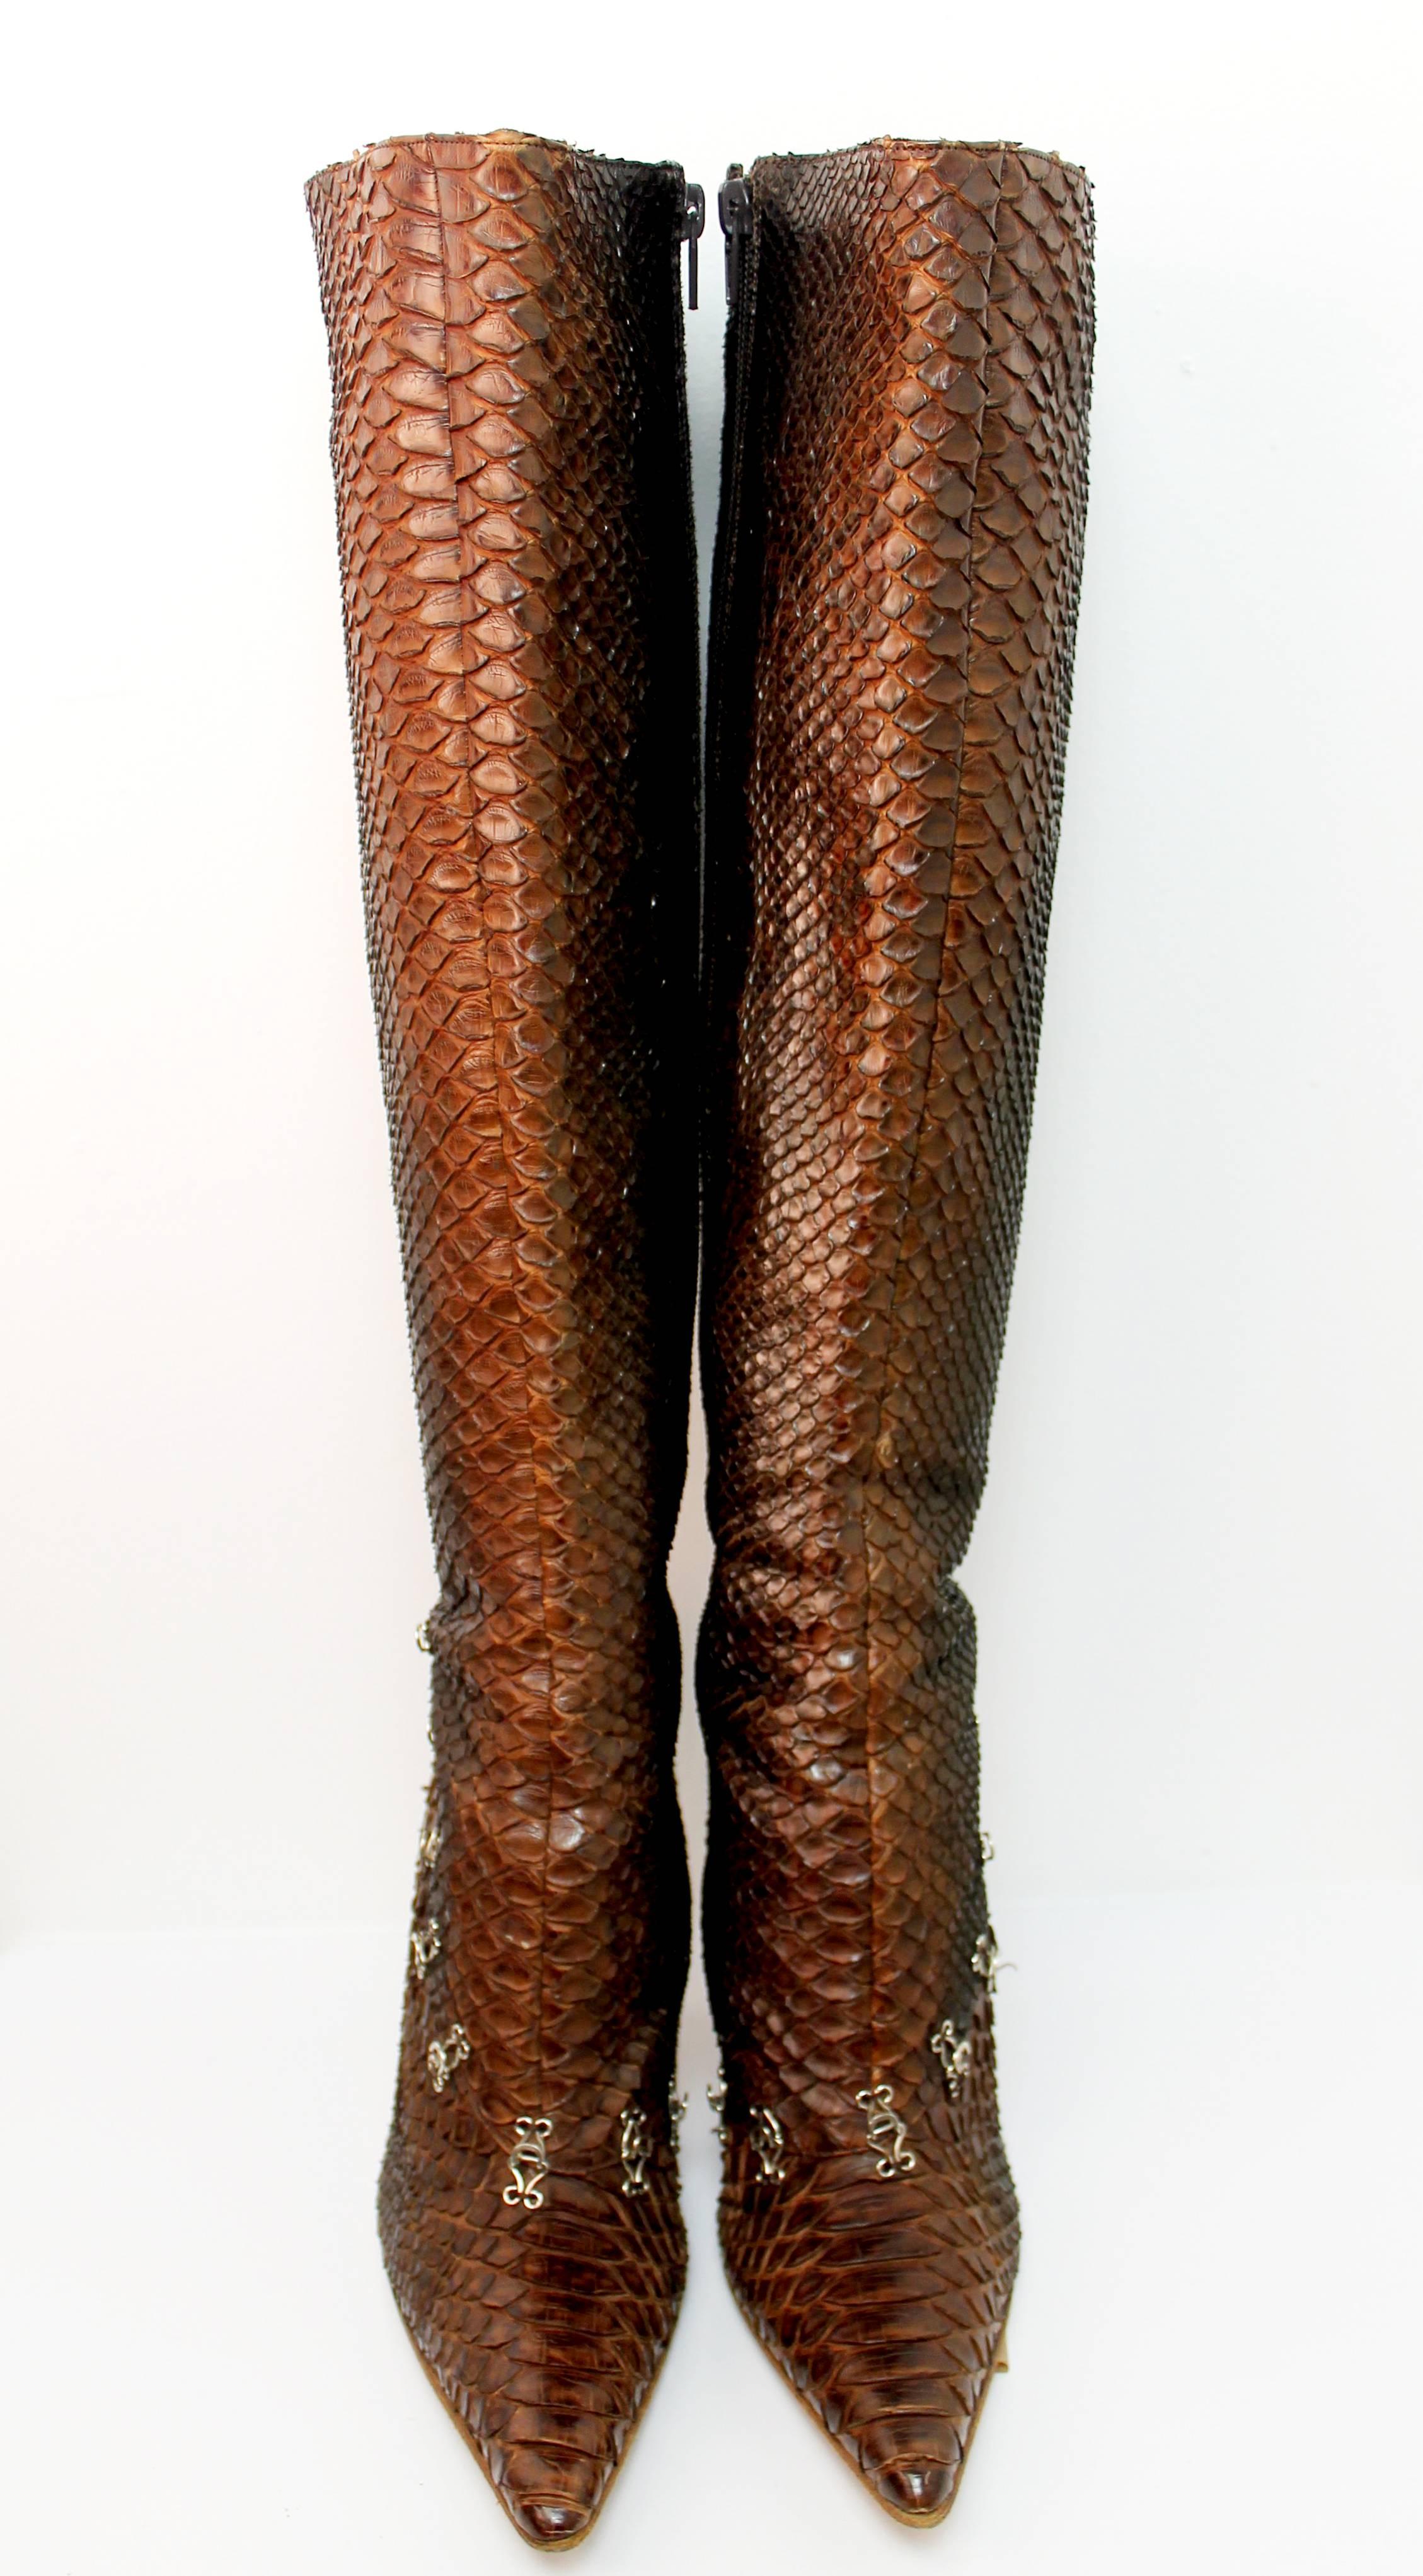 Stunning brown python knee-high pointed toe boots from John Galliano's Autumn/Winter 2001 collection. Features small silver hook and eye buckles from the middle of the foot to the top of the calf. 